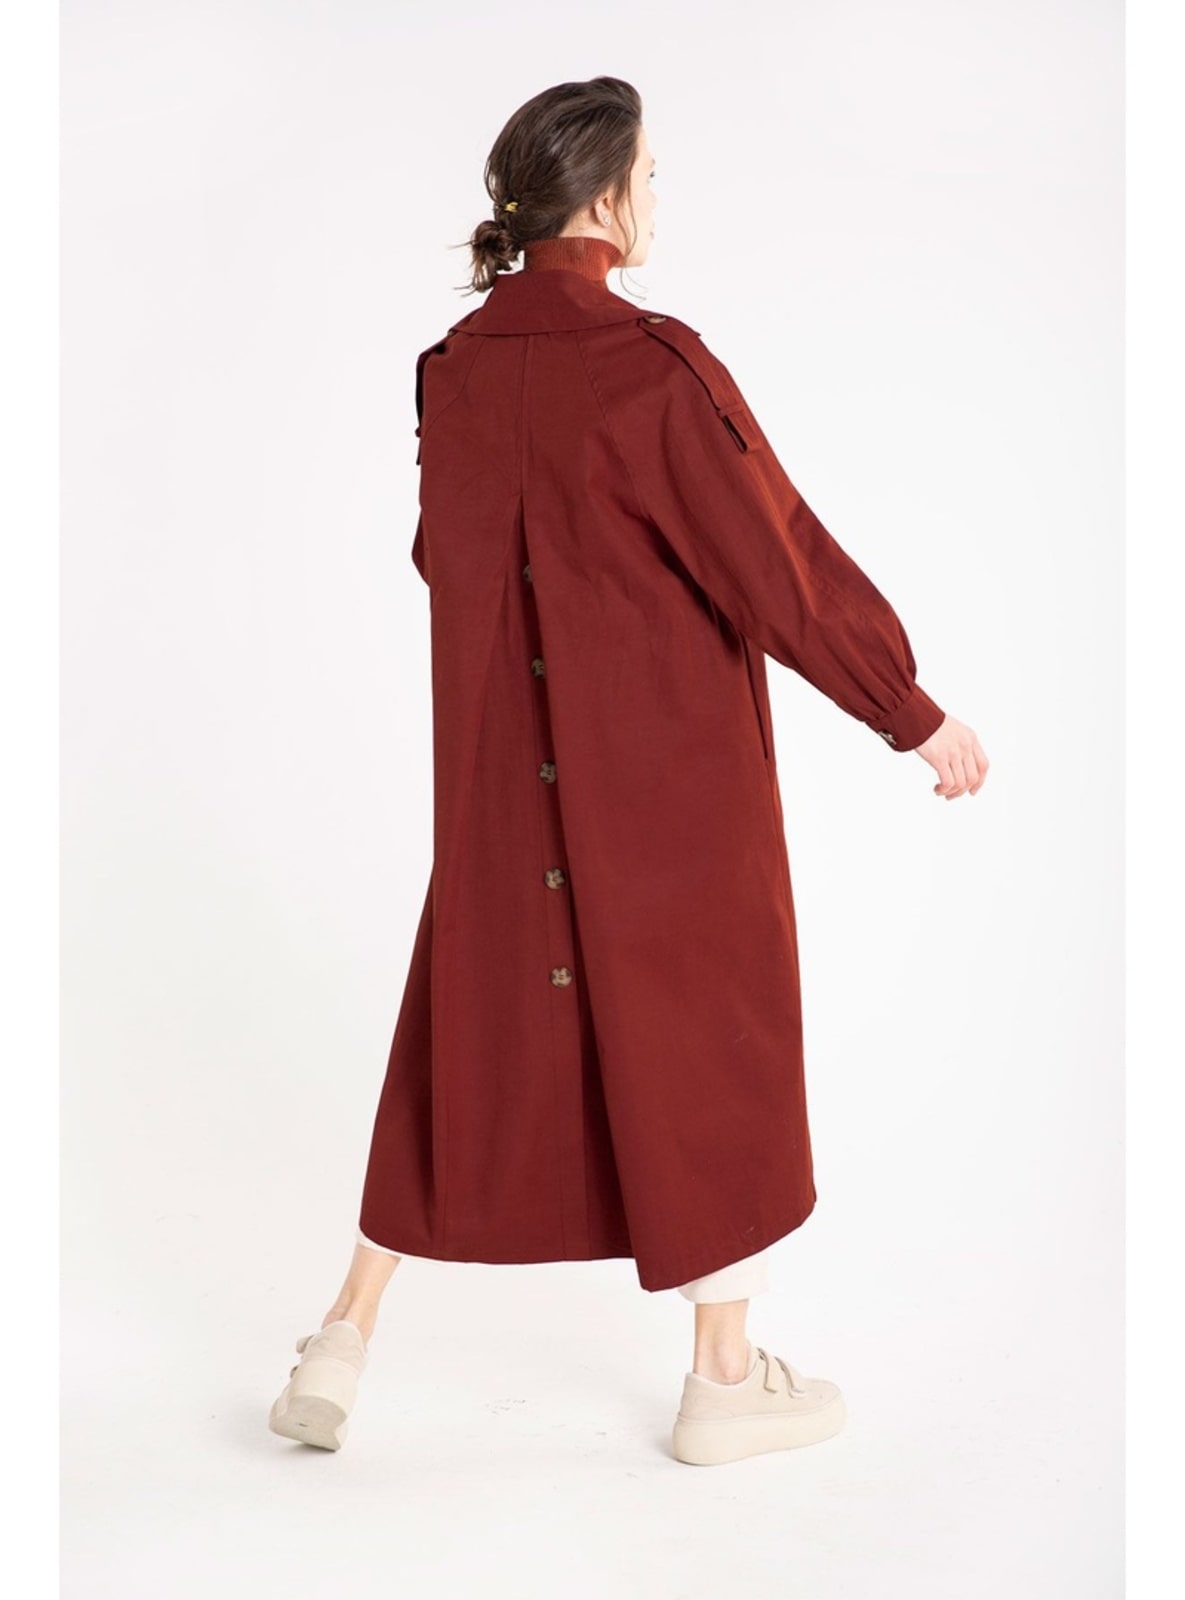 Trench Coat - Buttoned - With Tie - Dark Red